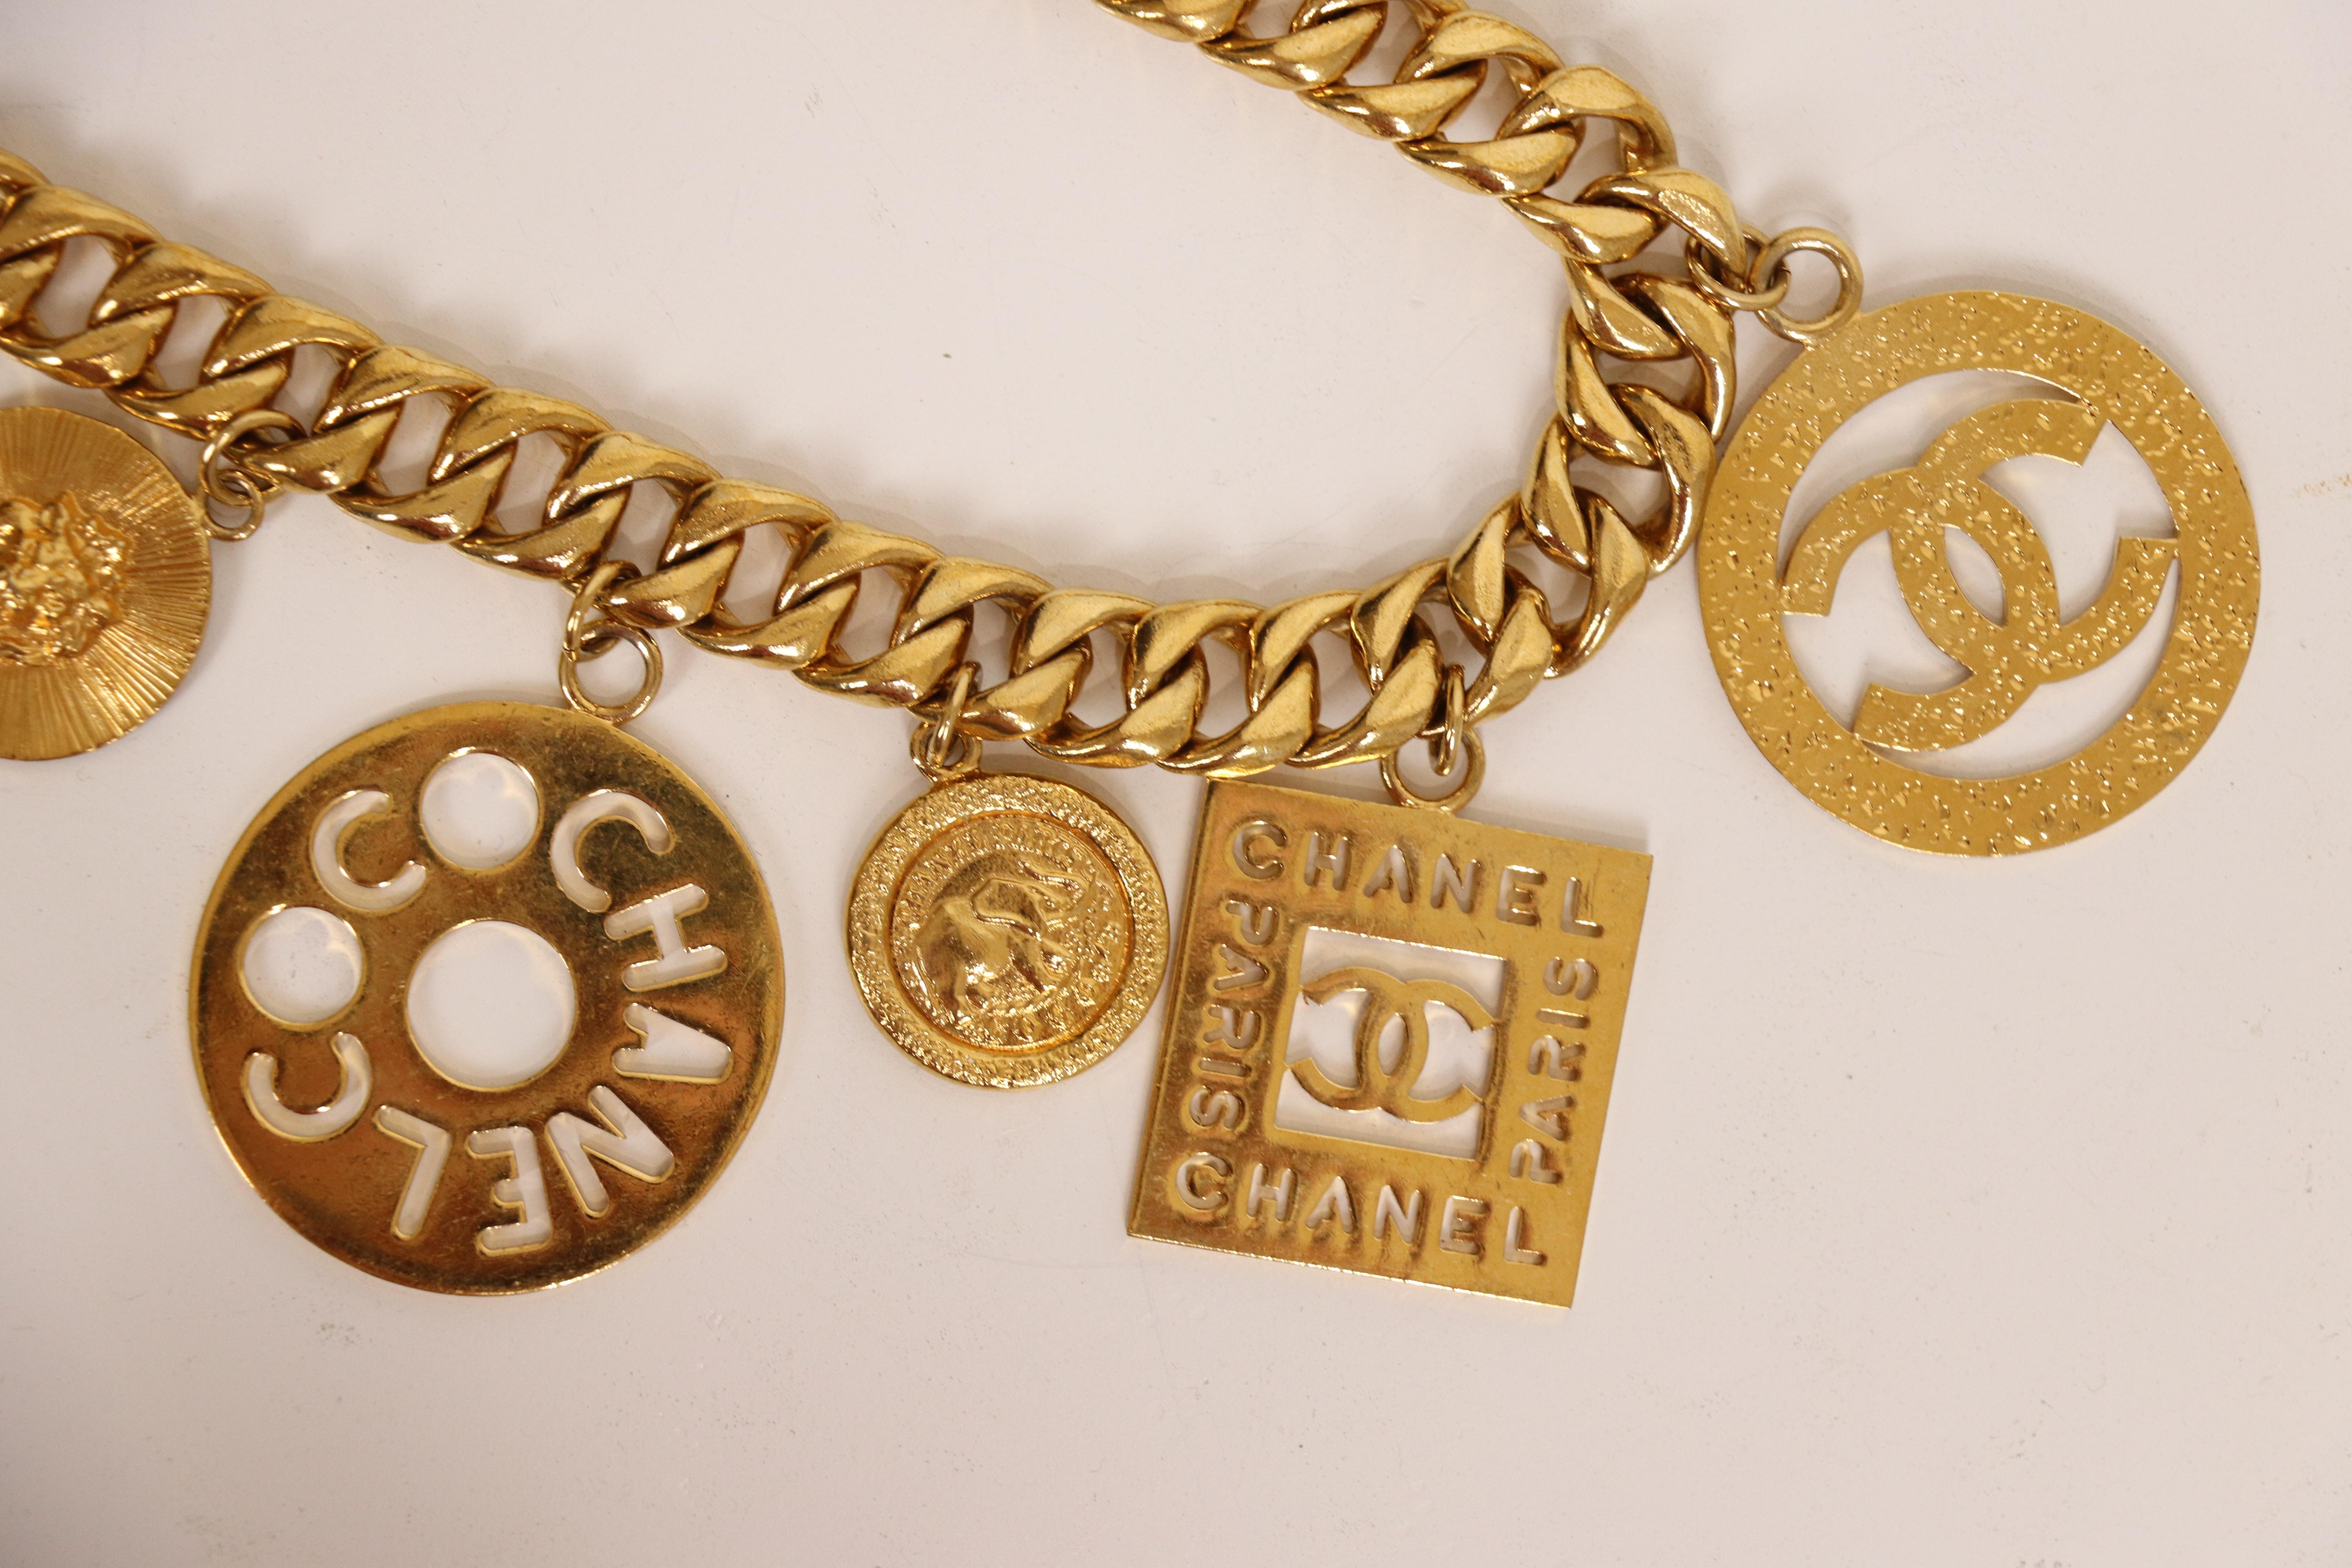 Chanel Collection 28 / 1991 Vintage Iconic 9 Charm Necklace or Belt 2